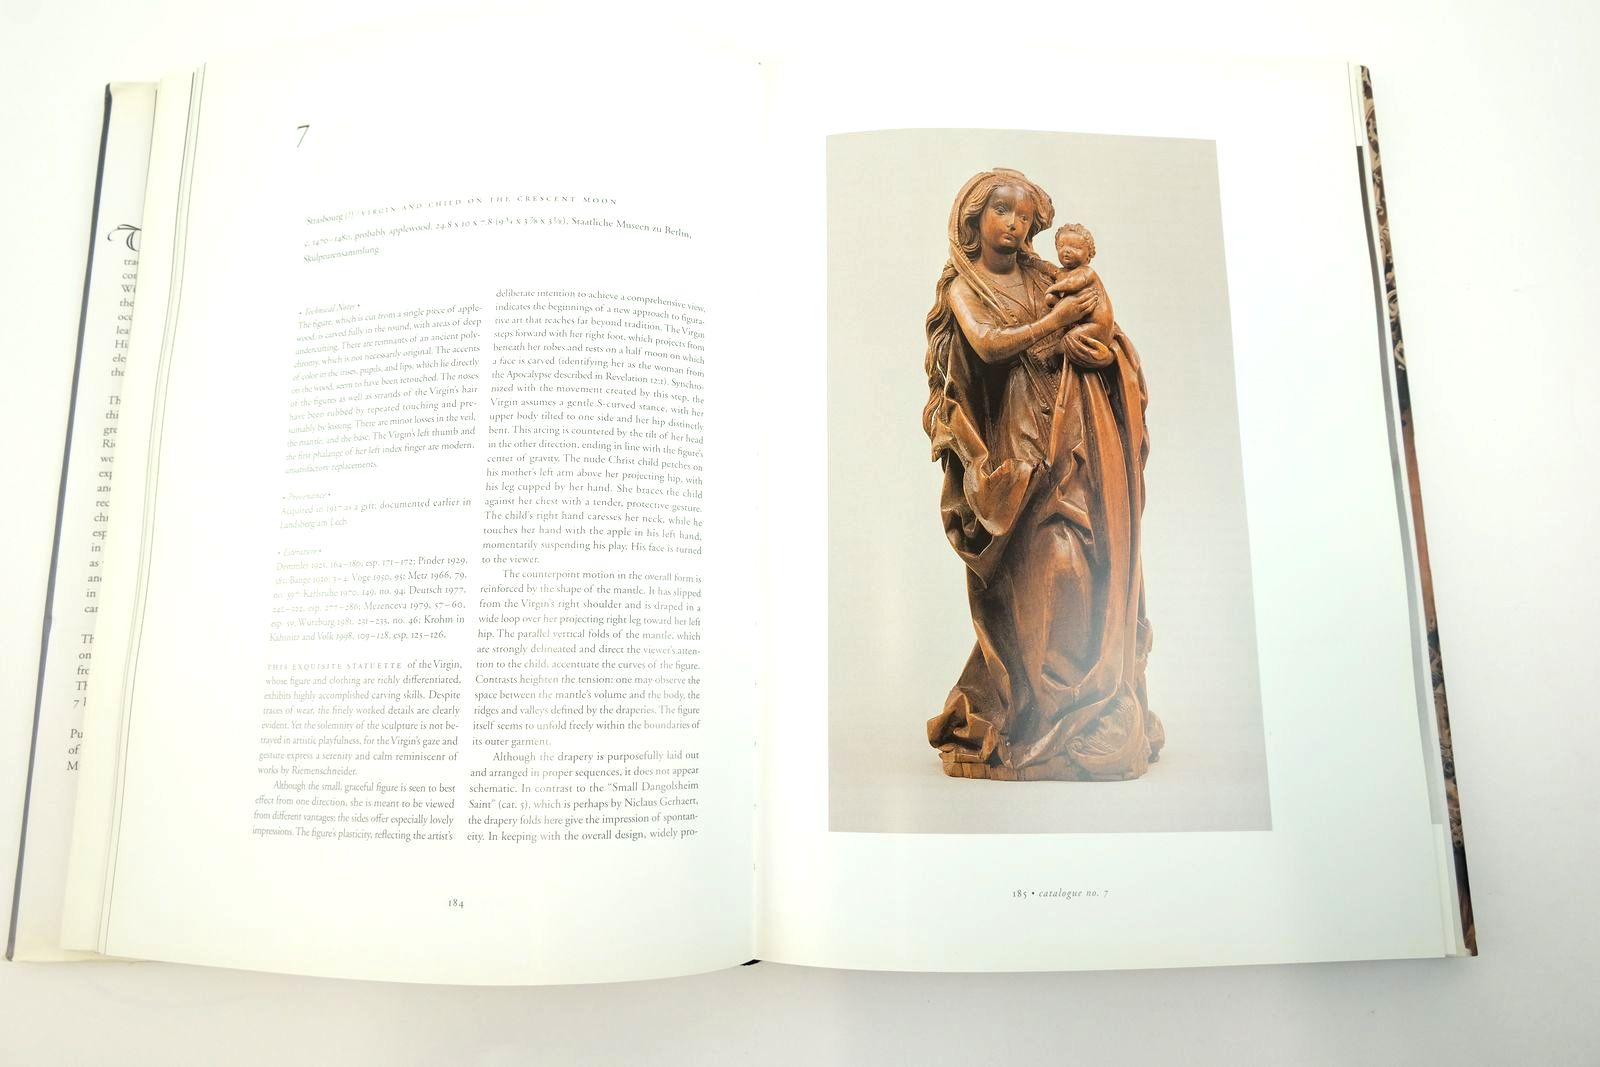 Photo of TILMAN RIEMENSCHNEIDER MASTER SCULPTOR OF THE LATE MIDDLE AGES written by Chapuis, Julien
Baxandall, Michael
et al, published by The National Gallery Of Art, Washington, The Metropolitan Museum of Art, Yale University Press (STOCK CODE: 2139075)  for sale by Stella & Rose's Books